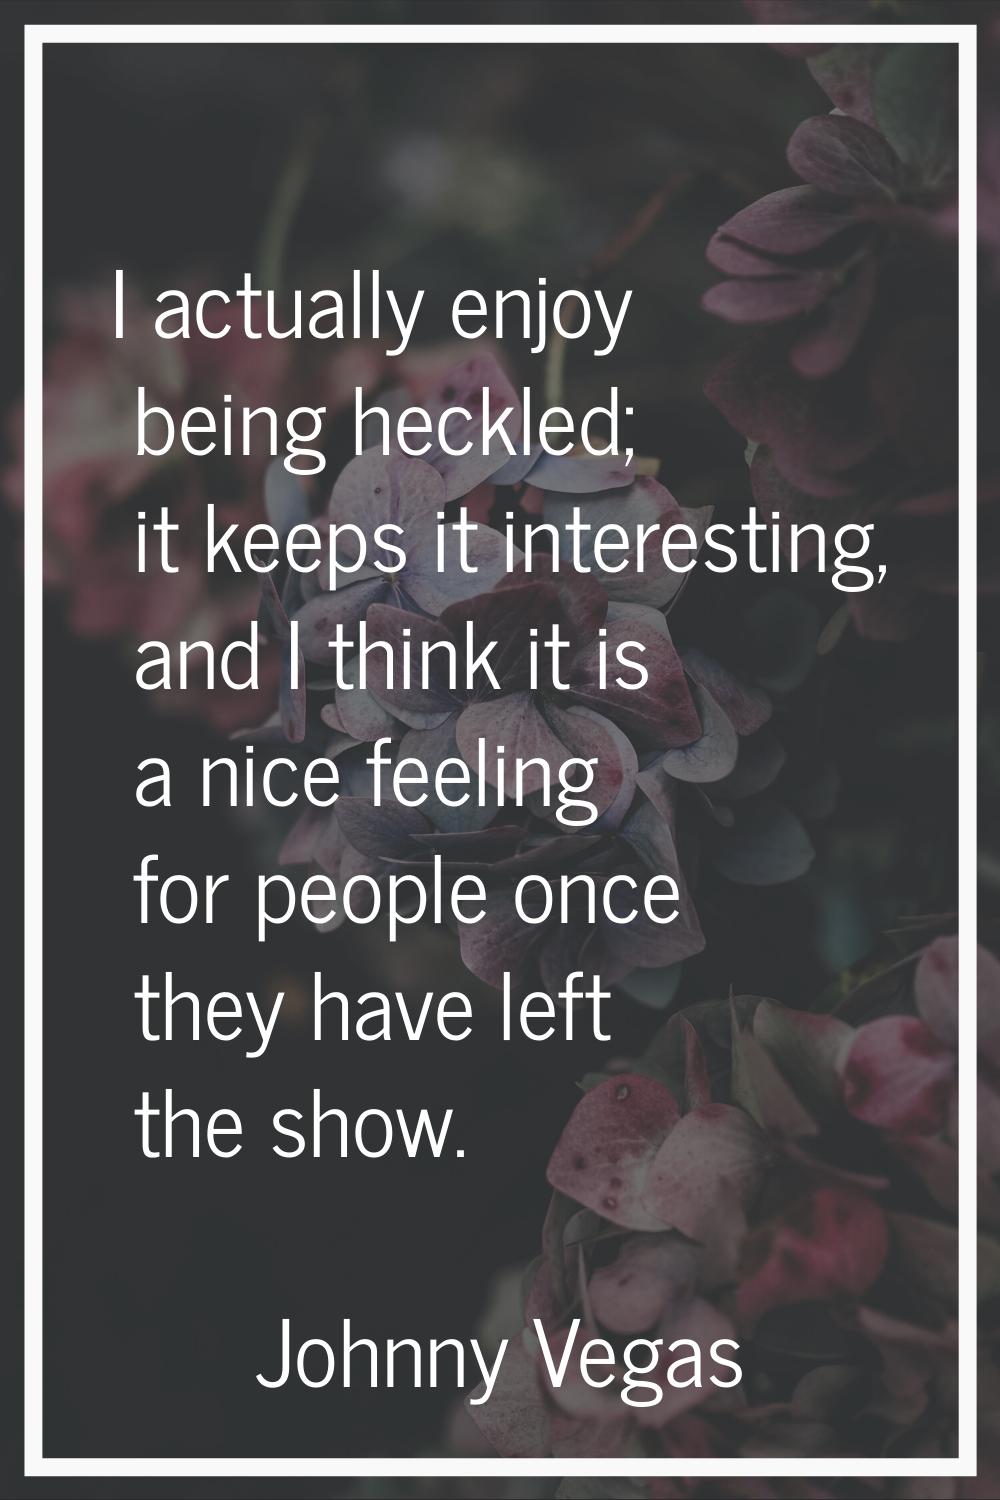 I actually enjoy being heckled; it keeps it interesting, and I think it is a nice feeling for peopl